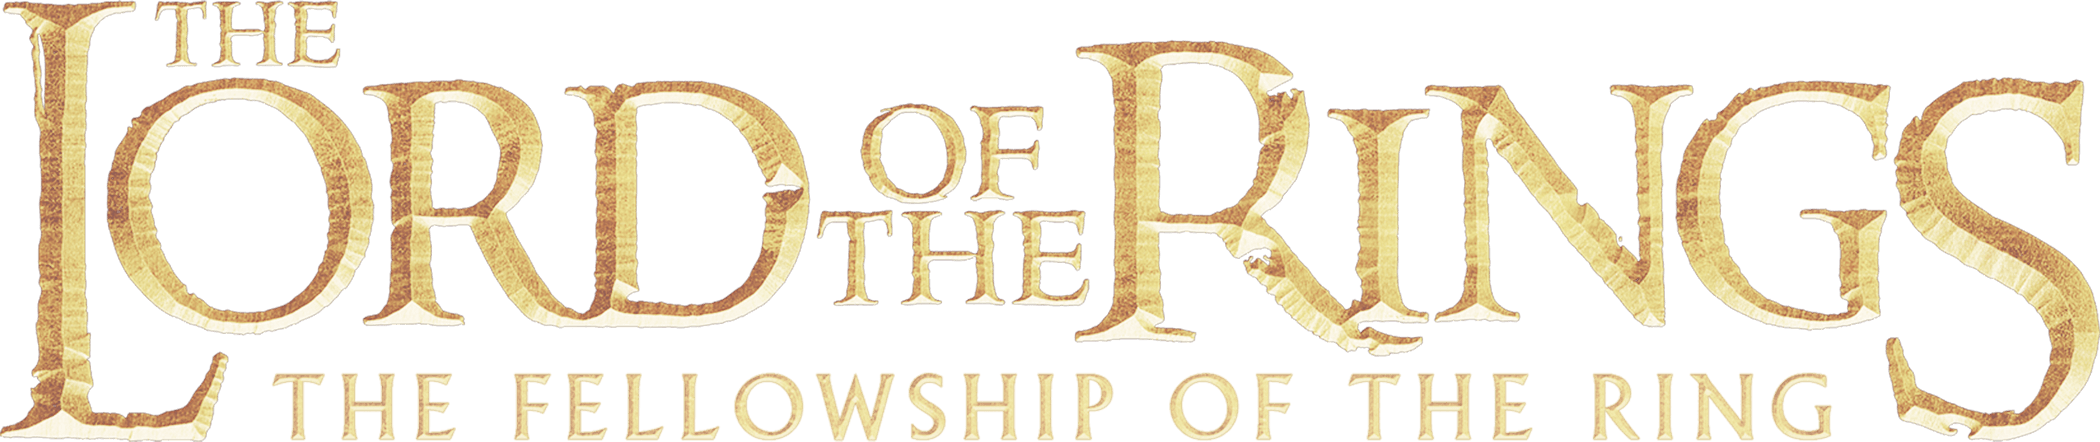 The Lord of the Rings: The Fellowship of the Ring logo